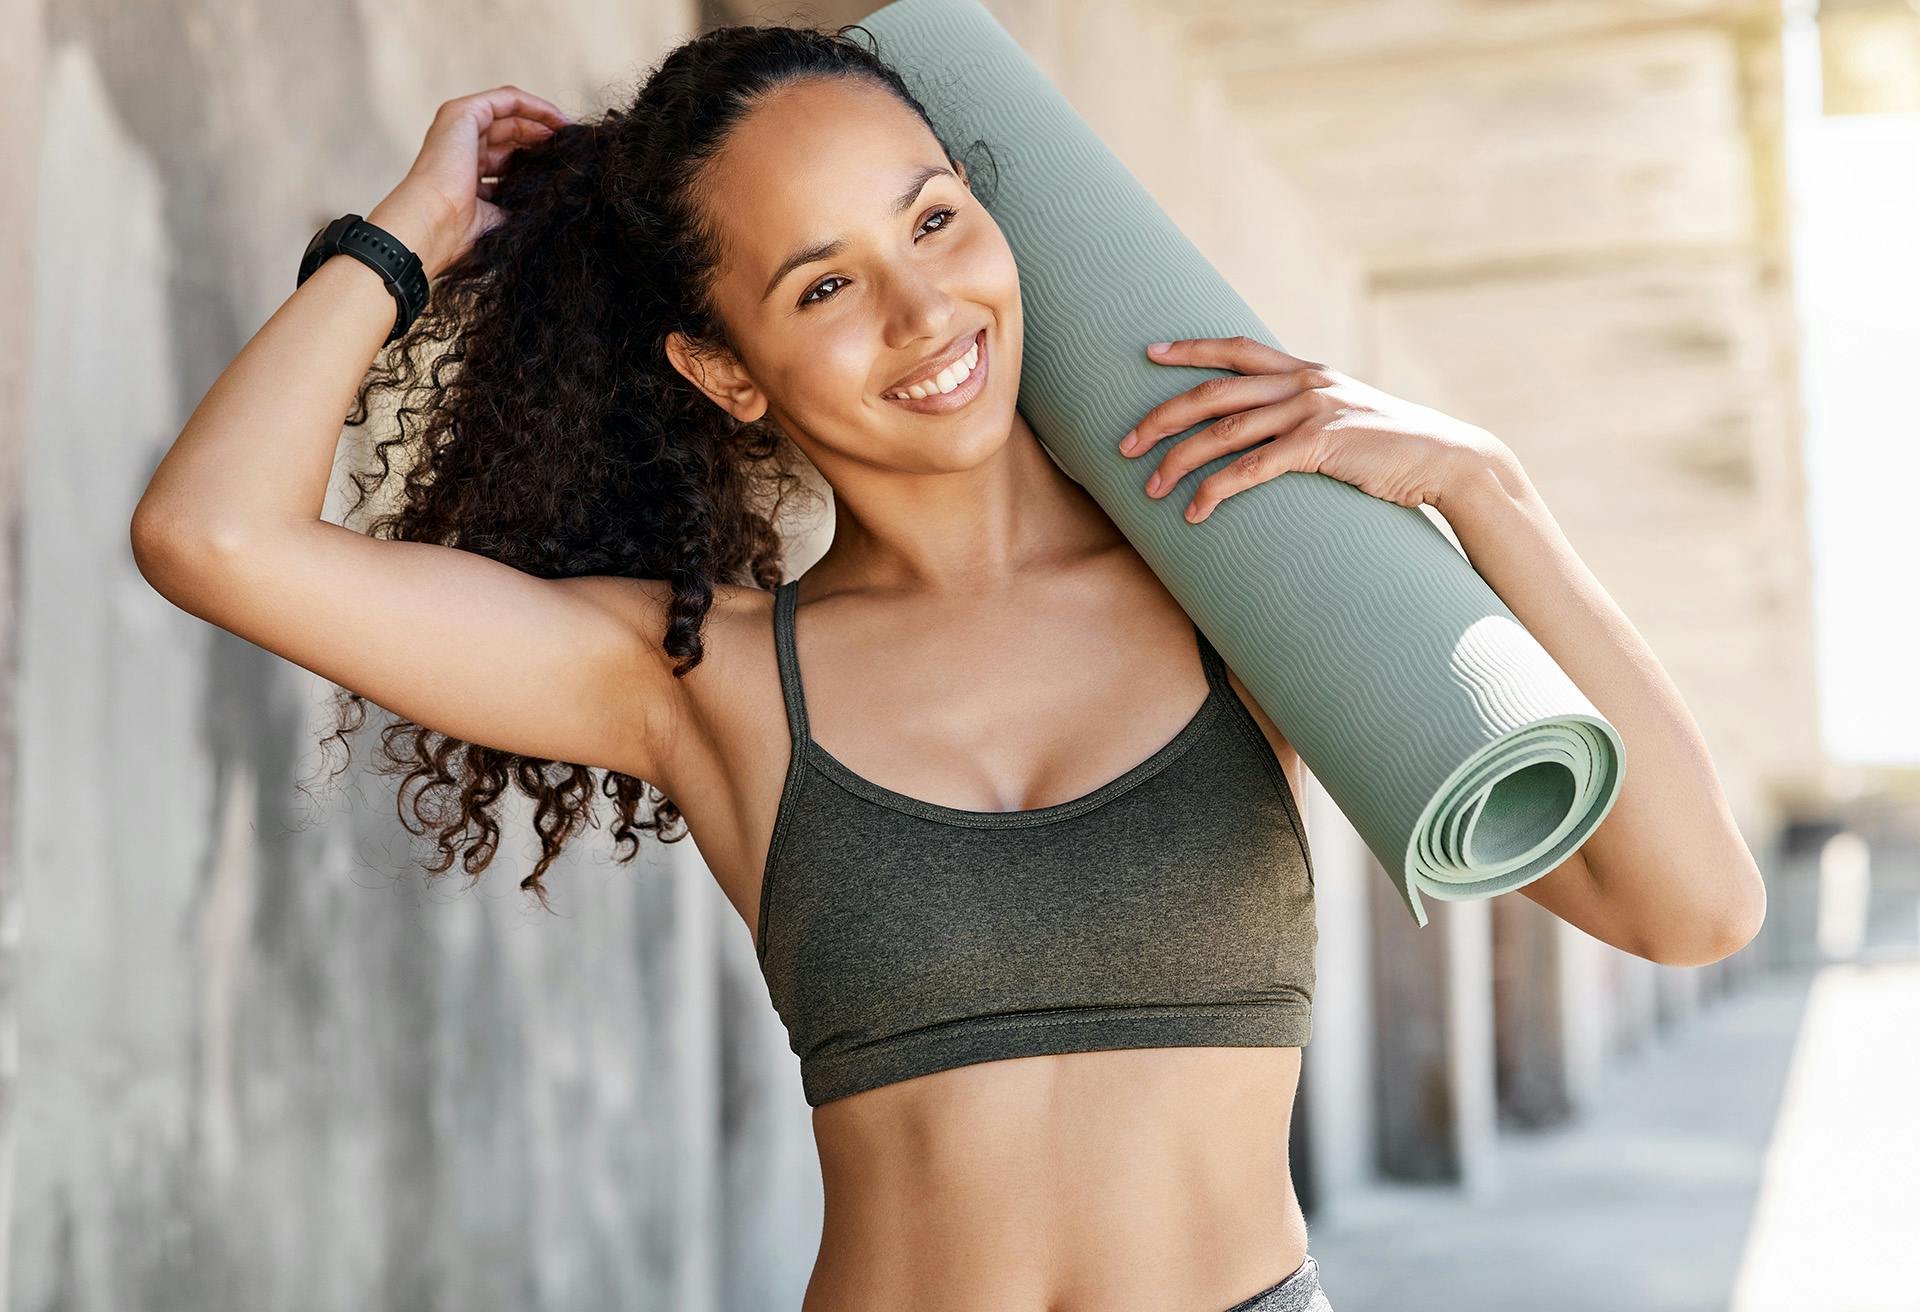 Woman outside smiling while wearing a workout top and carrying a yoga mat